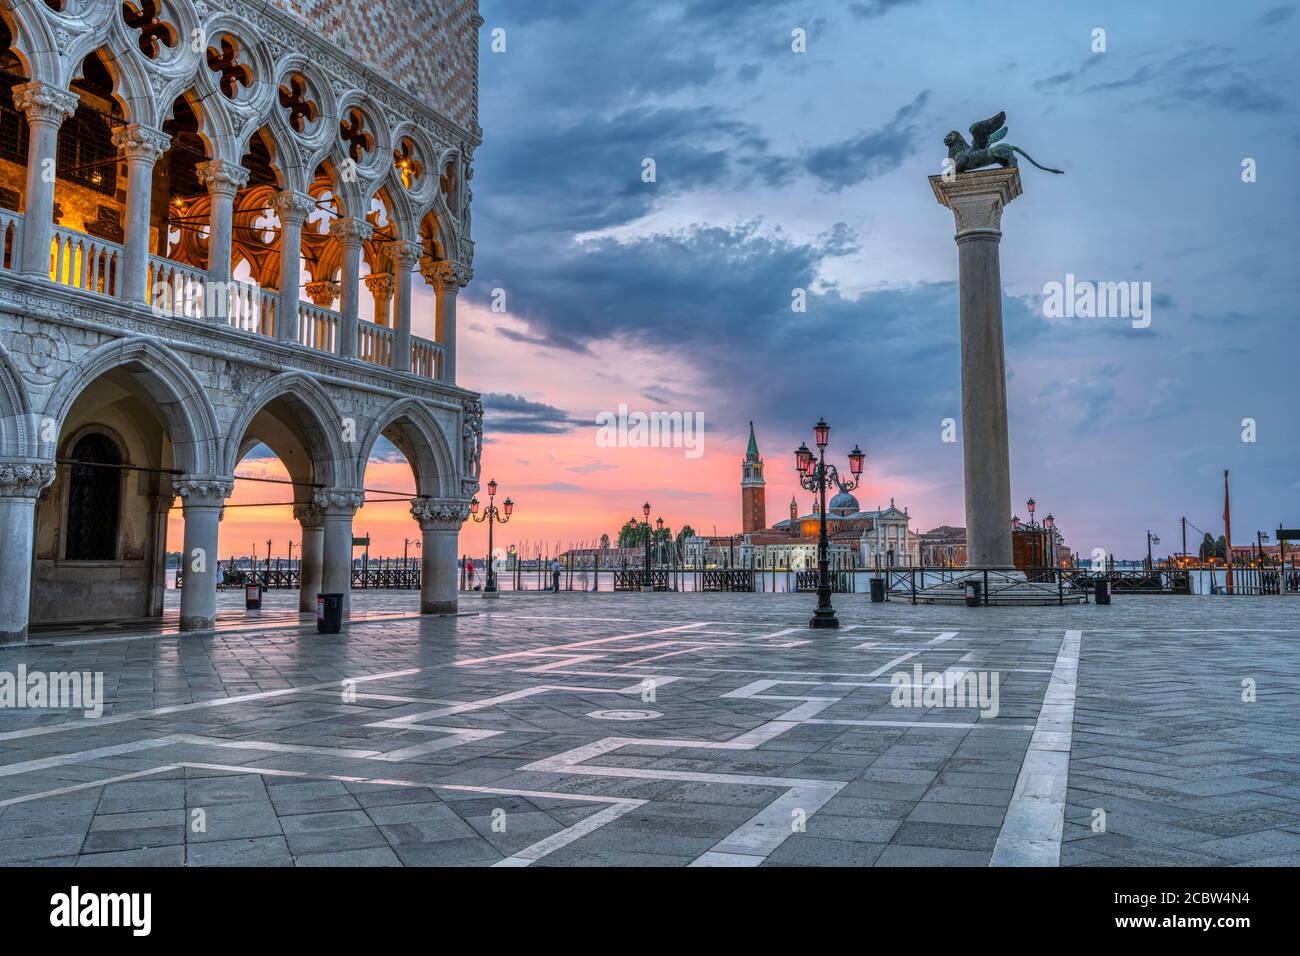 Dramatic sunrise at the Piazzetta San Marco and the Palazza Ducale in Venice, Italy Stock Photo